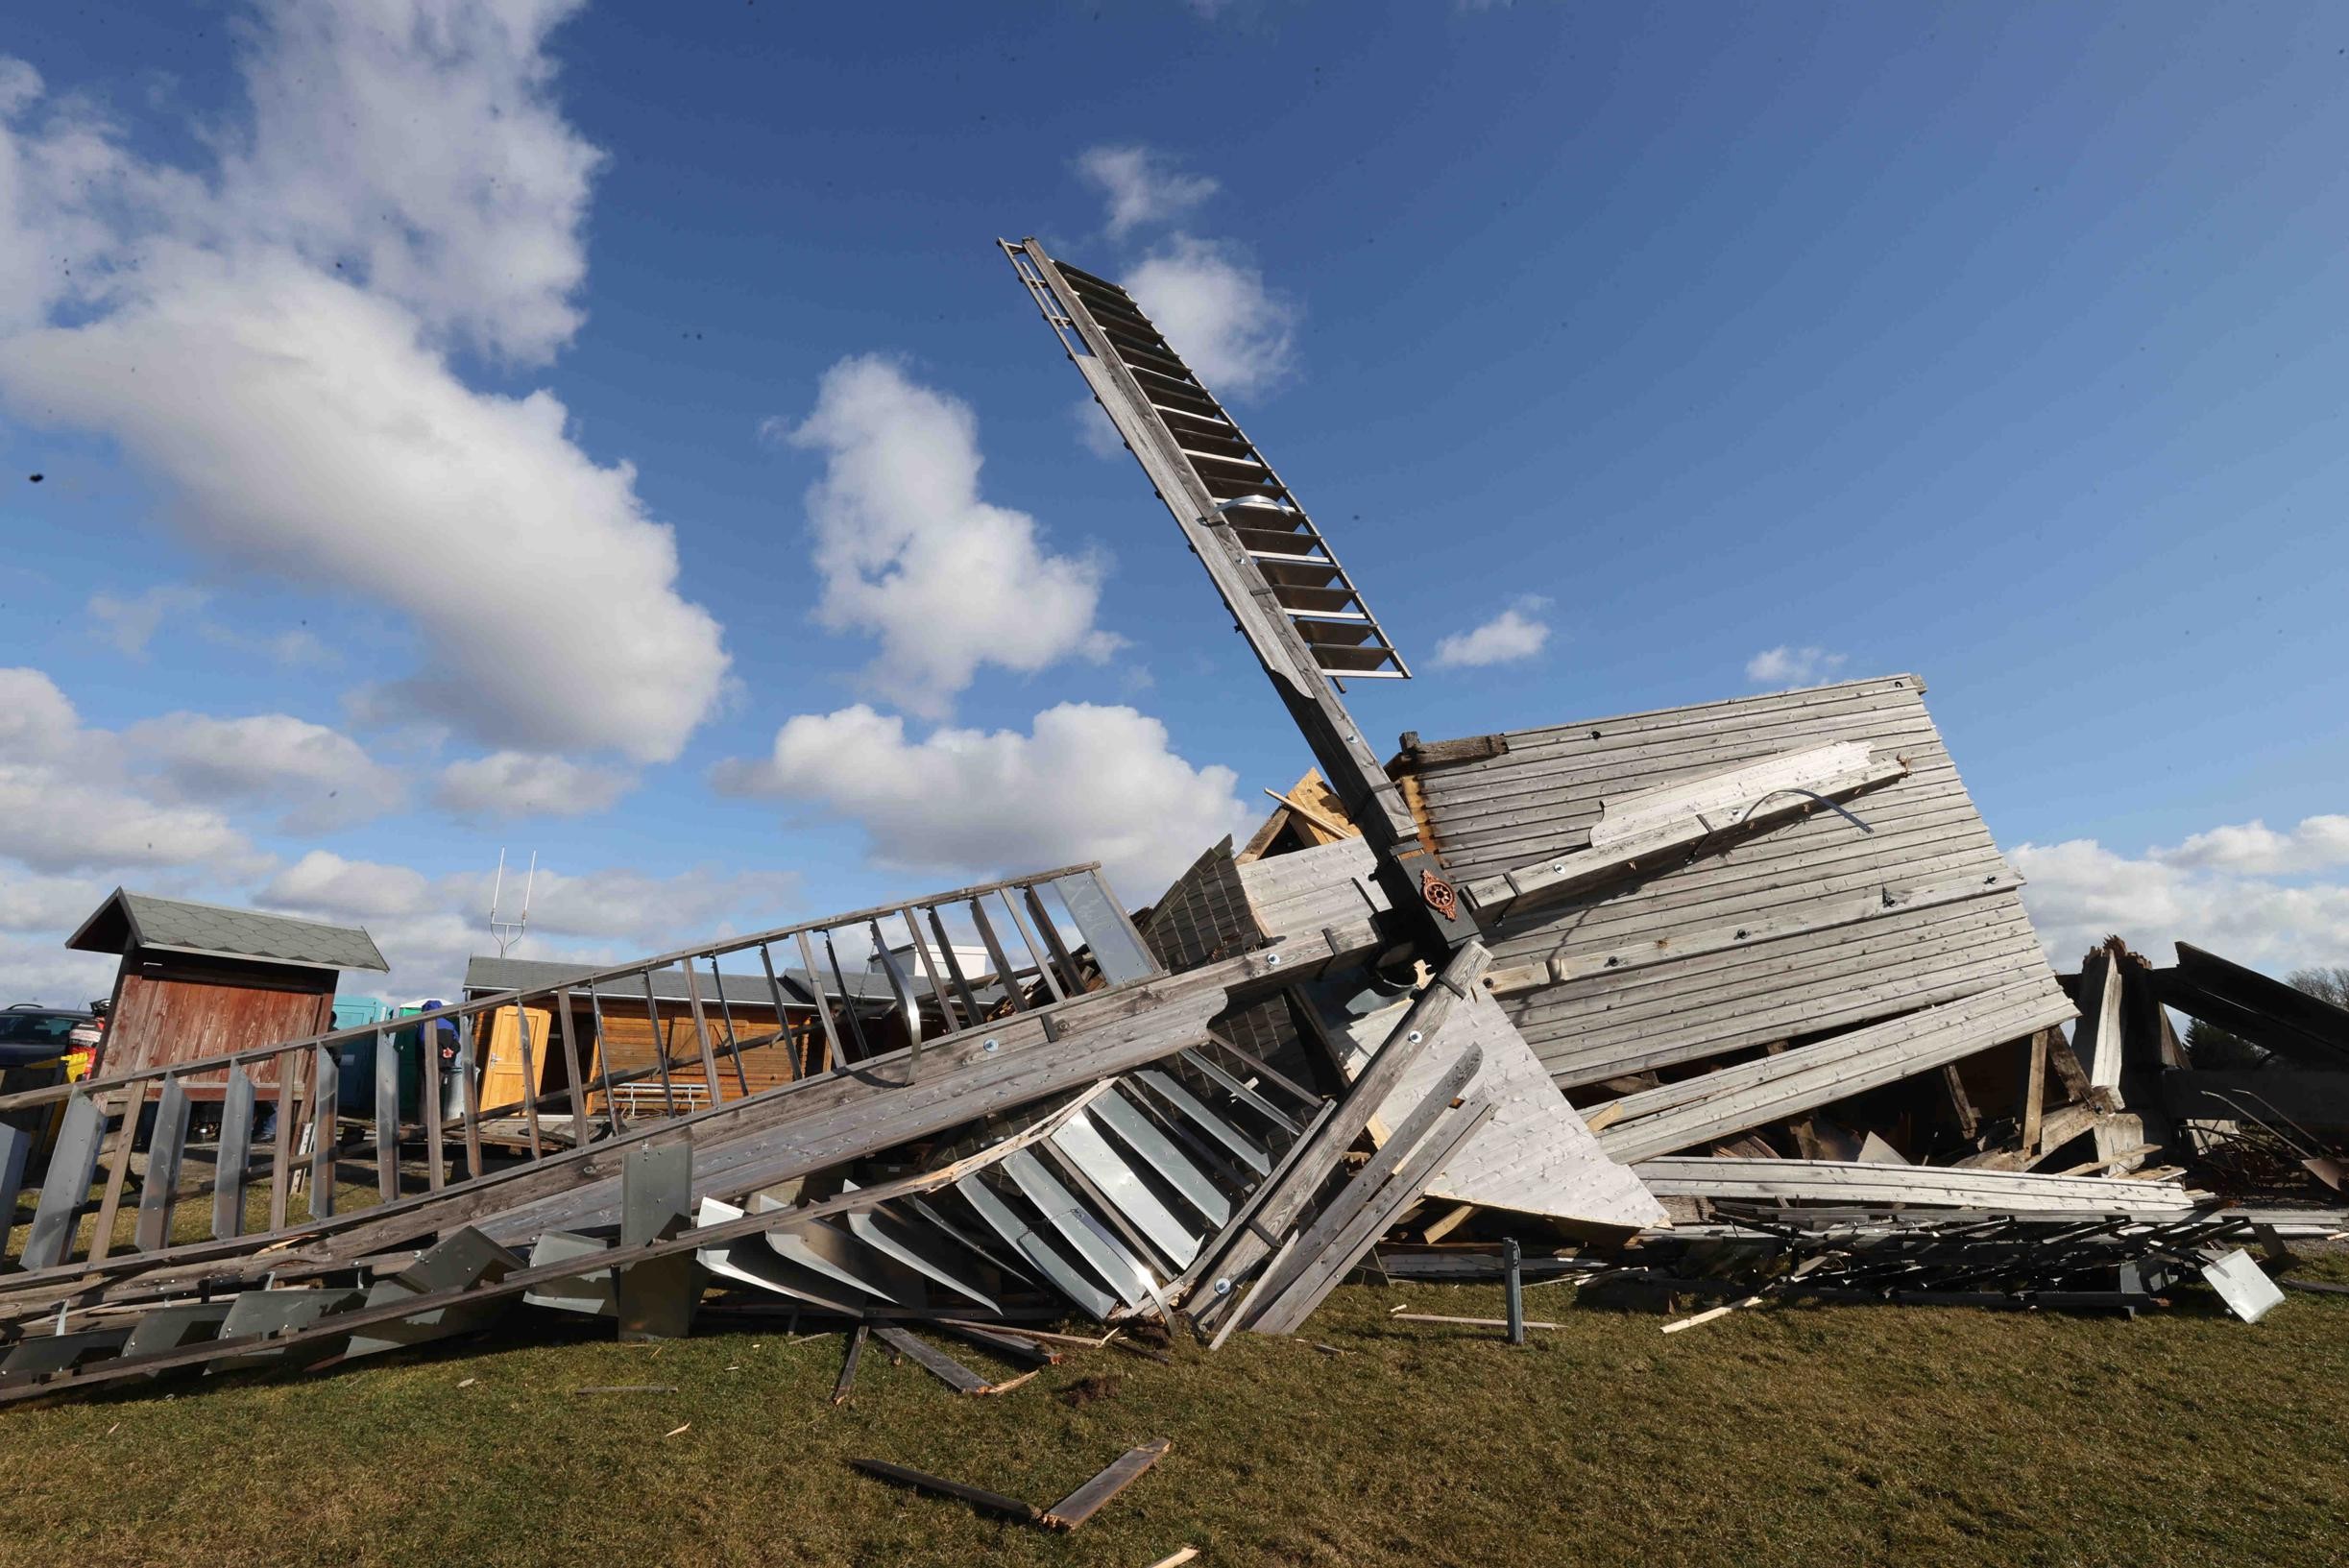 Cyclone blows over historic windmill in Germany